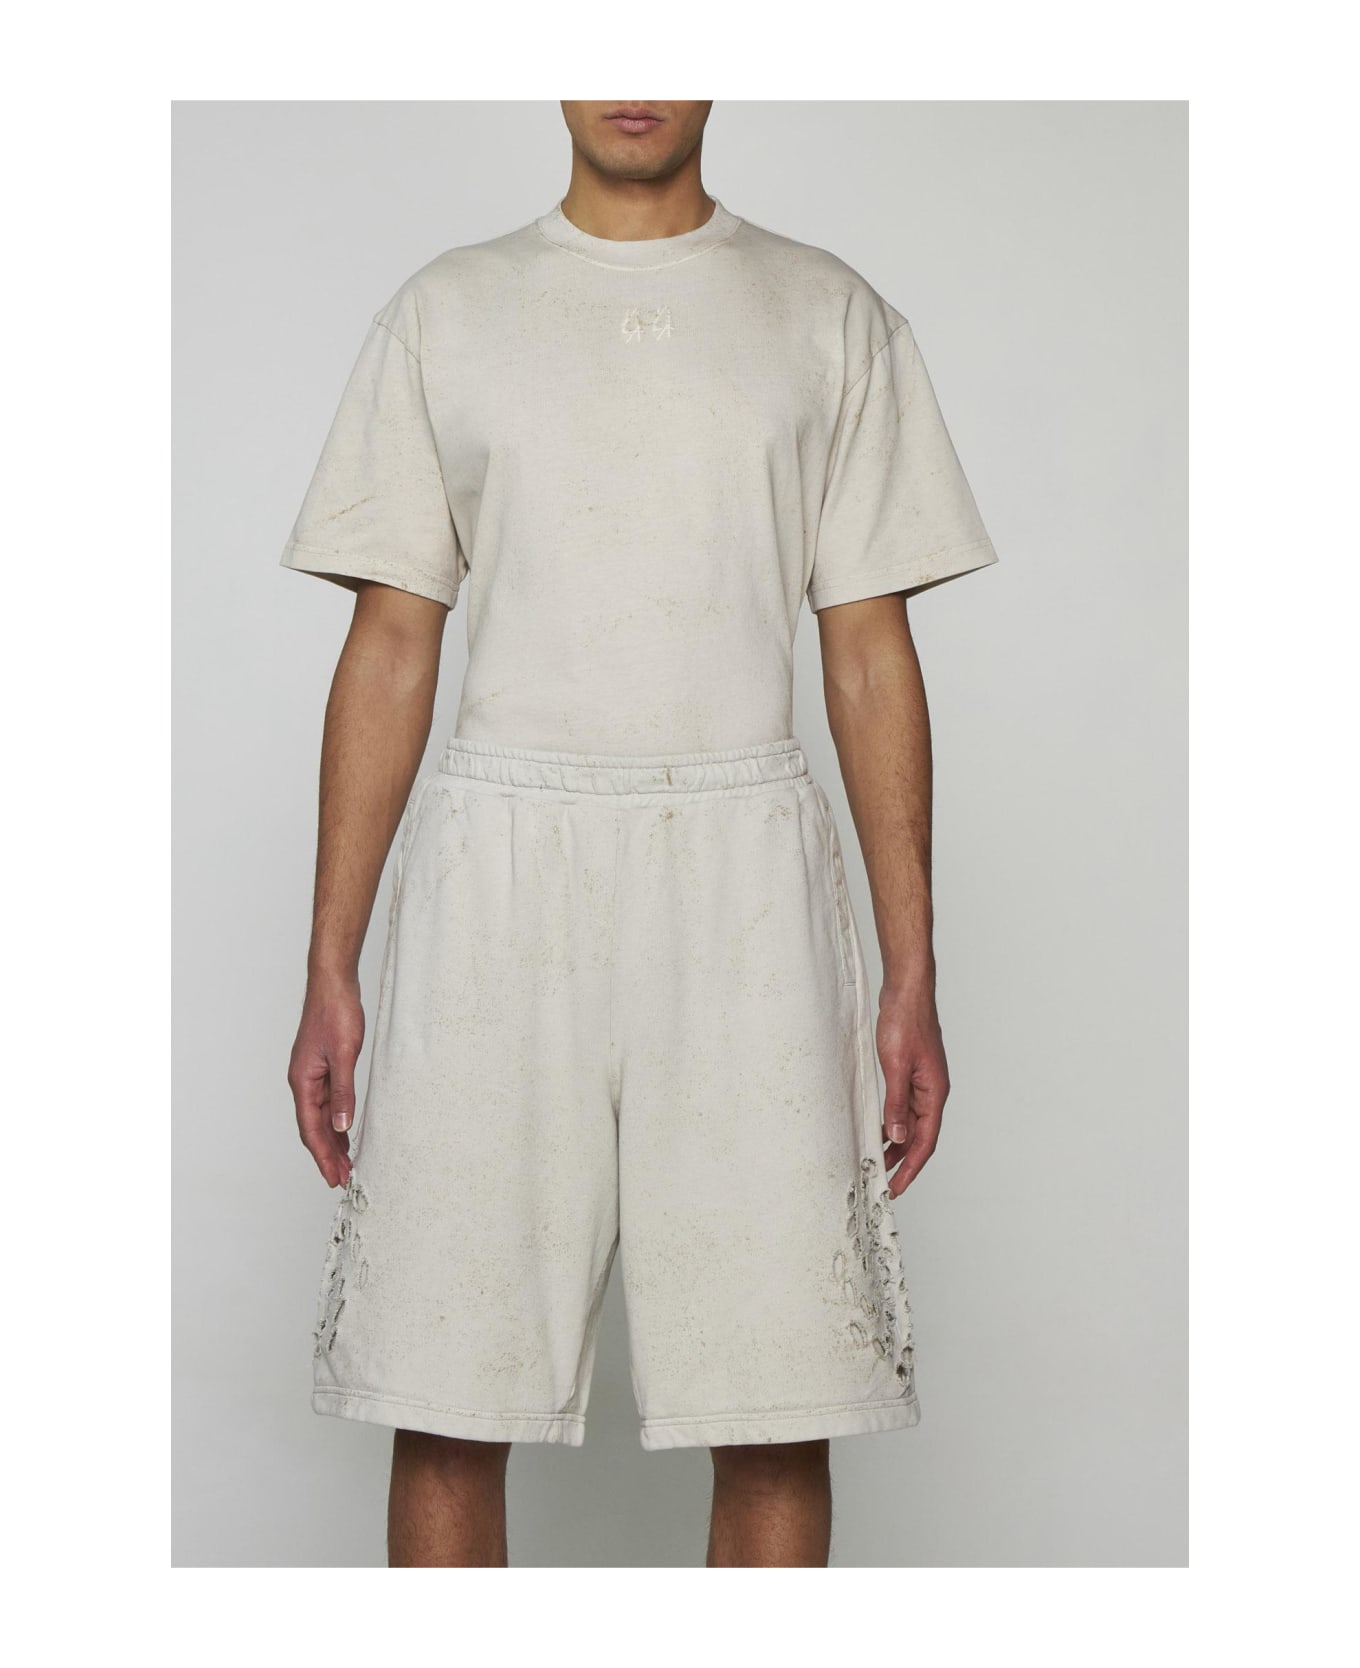 44 Label Group Holes Cotton Shorts - Dirty white+gyps